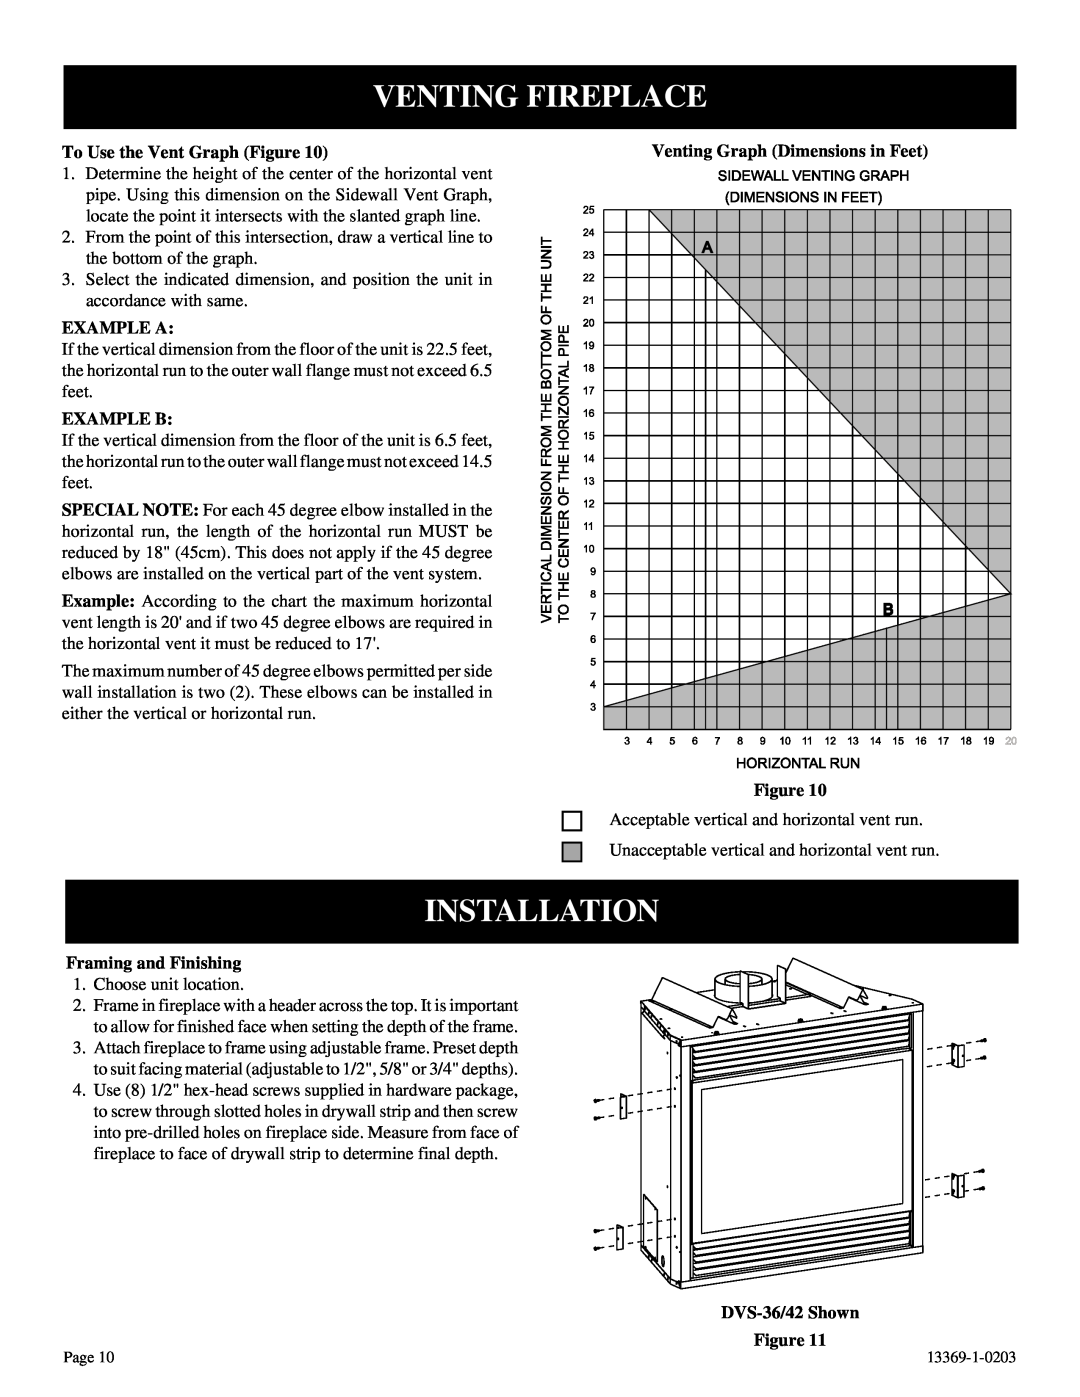 DVS 30-2 Venting Fireplace, Installation, To Use the Vent Graph Figure, Example A, Example B, Framing and Finishing 